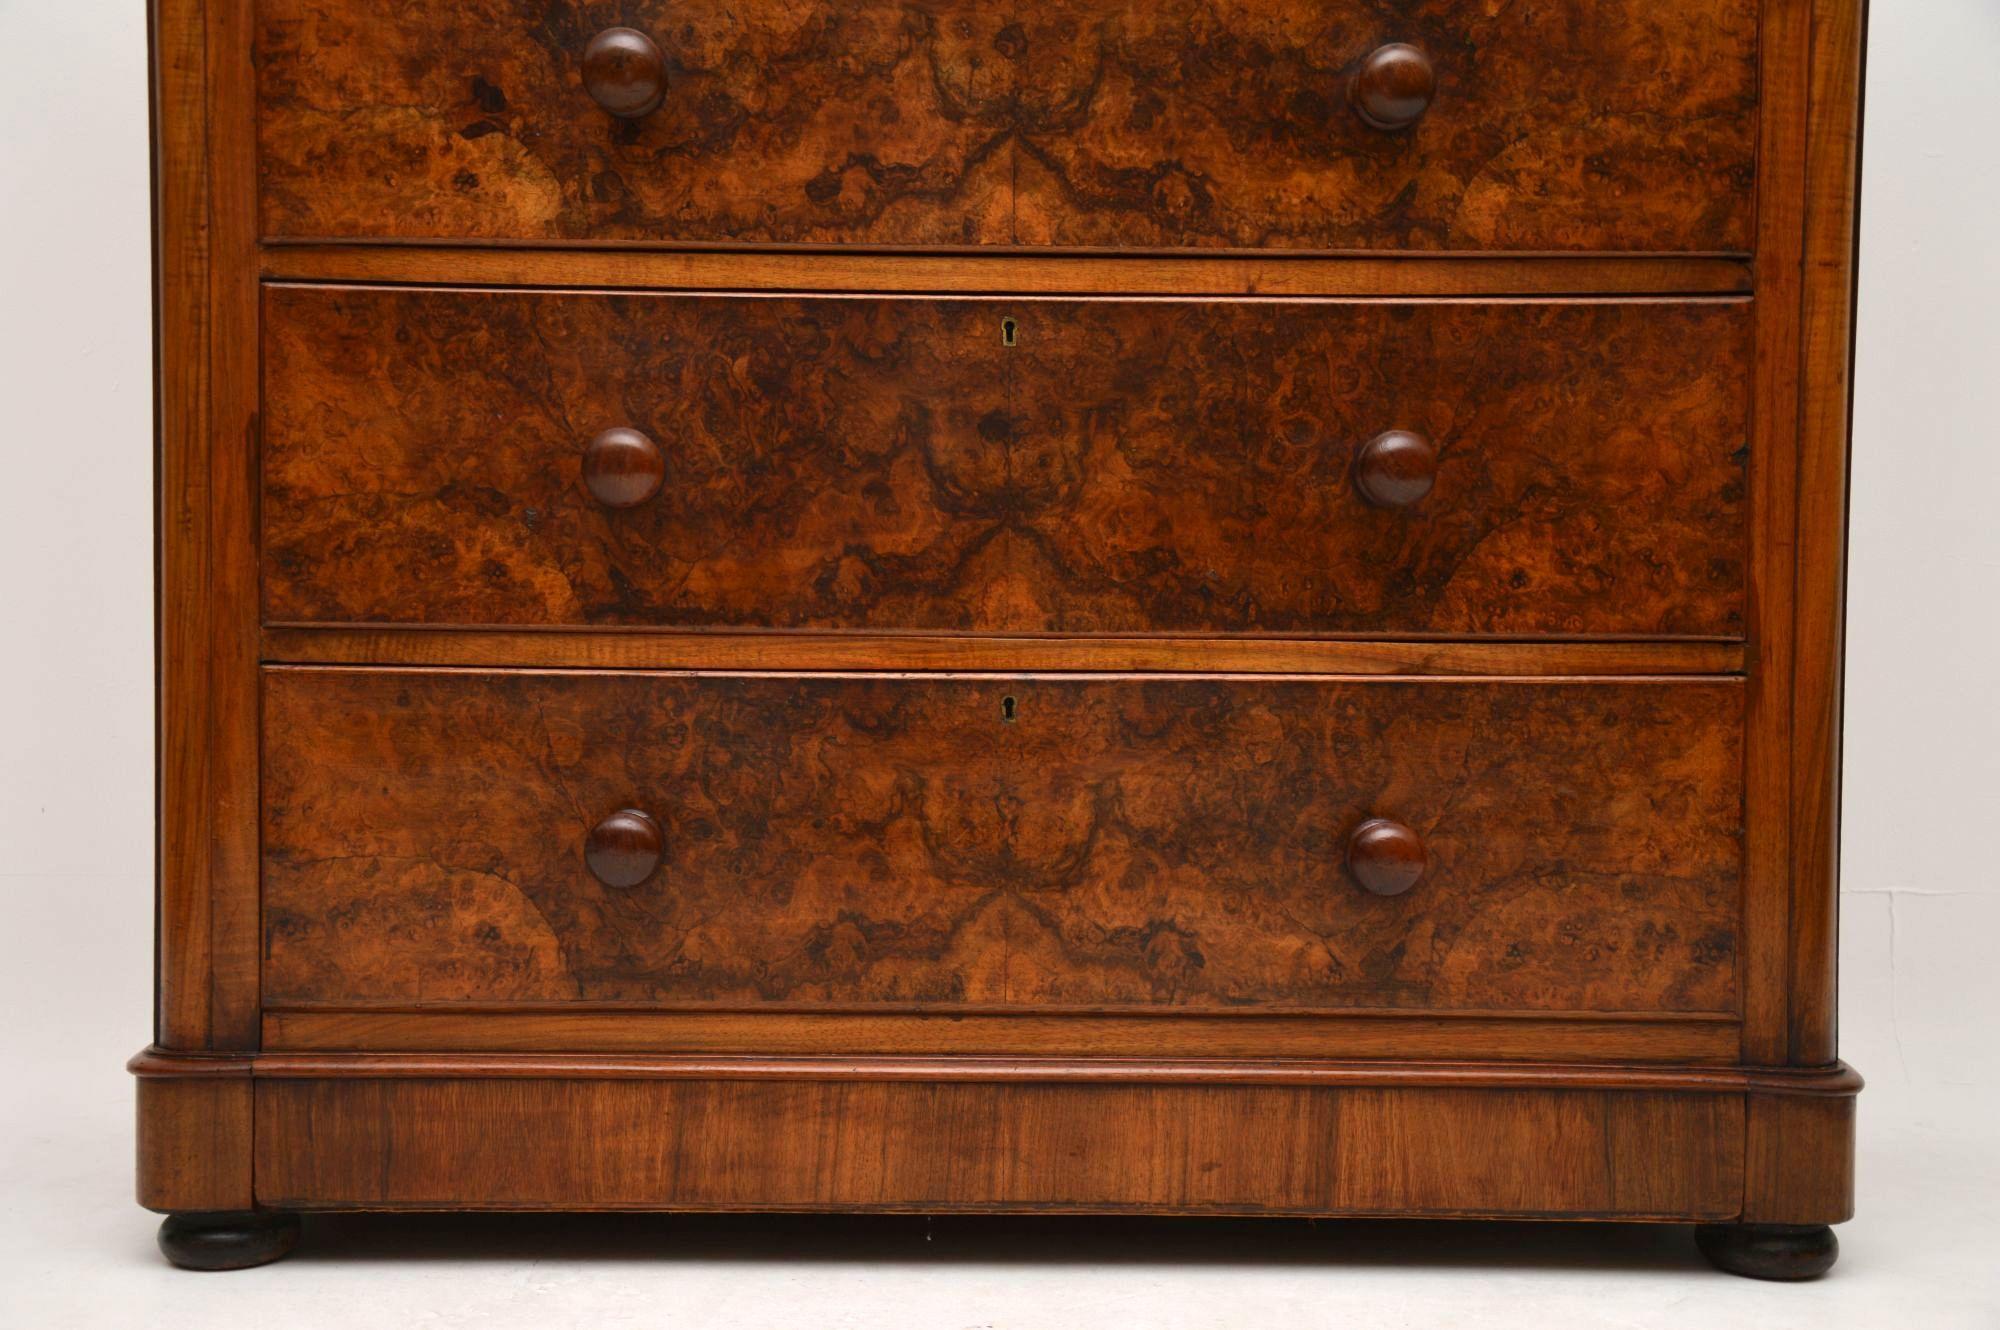 English Large Antique Victorian Burr Walnut Chest of Drawers